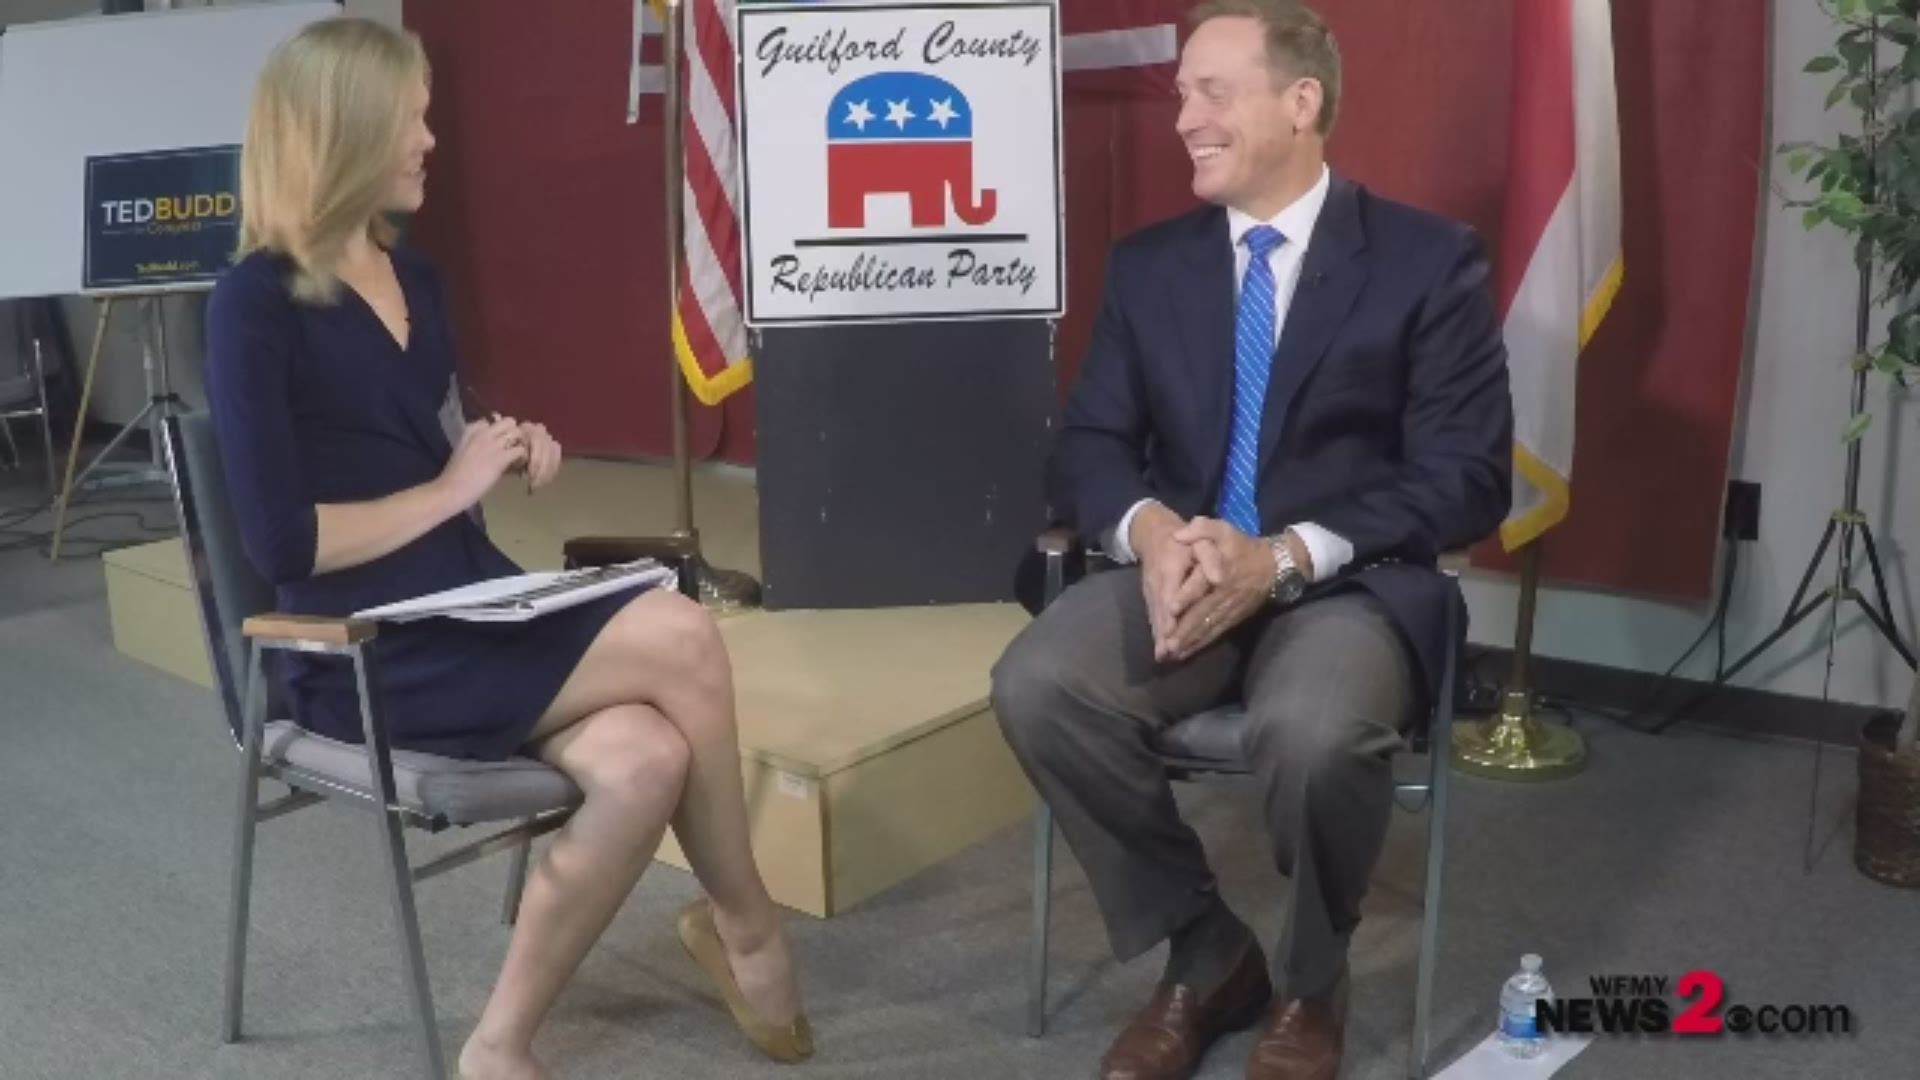 Representative Ted Budd is running for re-election in North Carolina's 13th District in the US House of Representatives. WFMY News 2's Maddie Gardner sat down with Representative Budd to talk about his work in congress and the campaign.WFMY News 2's Maddi